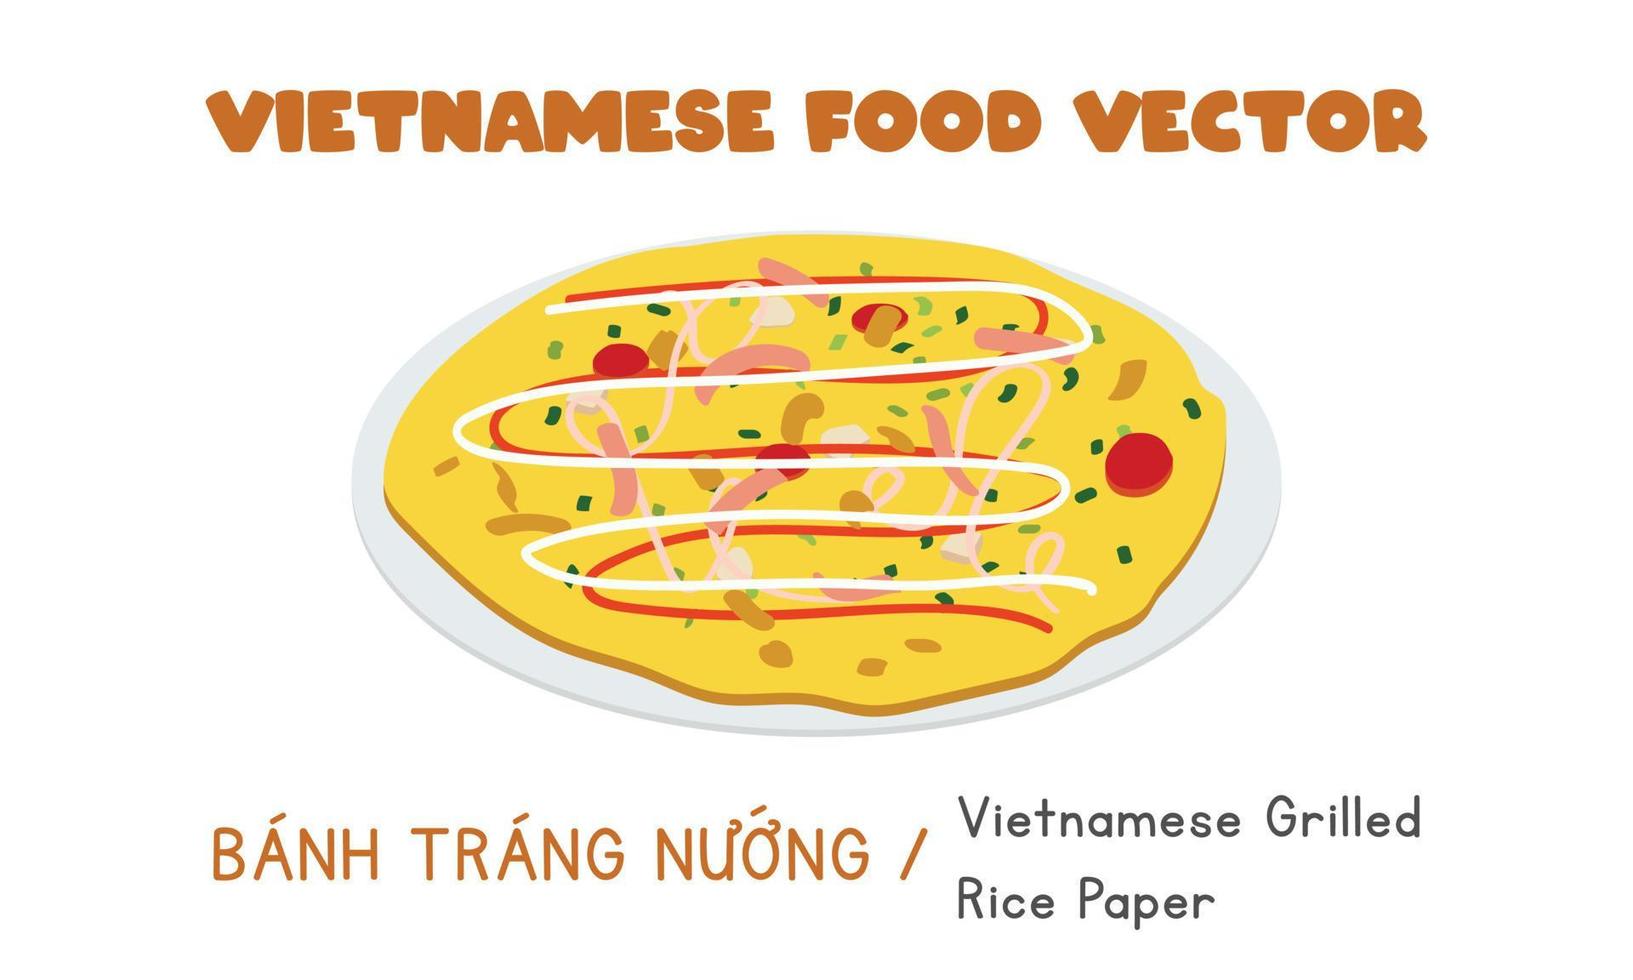 Vietnamese Banh Trang Nuong - grilled rice paper pizza flat vector design, clipart cartoon style. Asian food. Vietnamese cuisine. Vietnam food